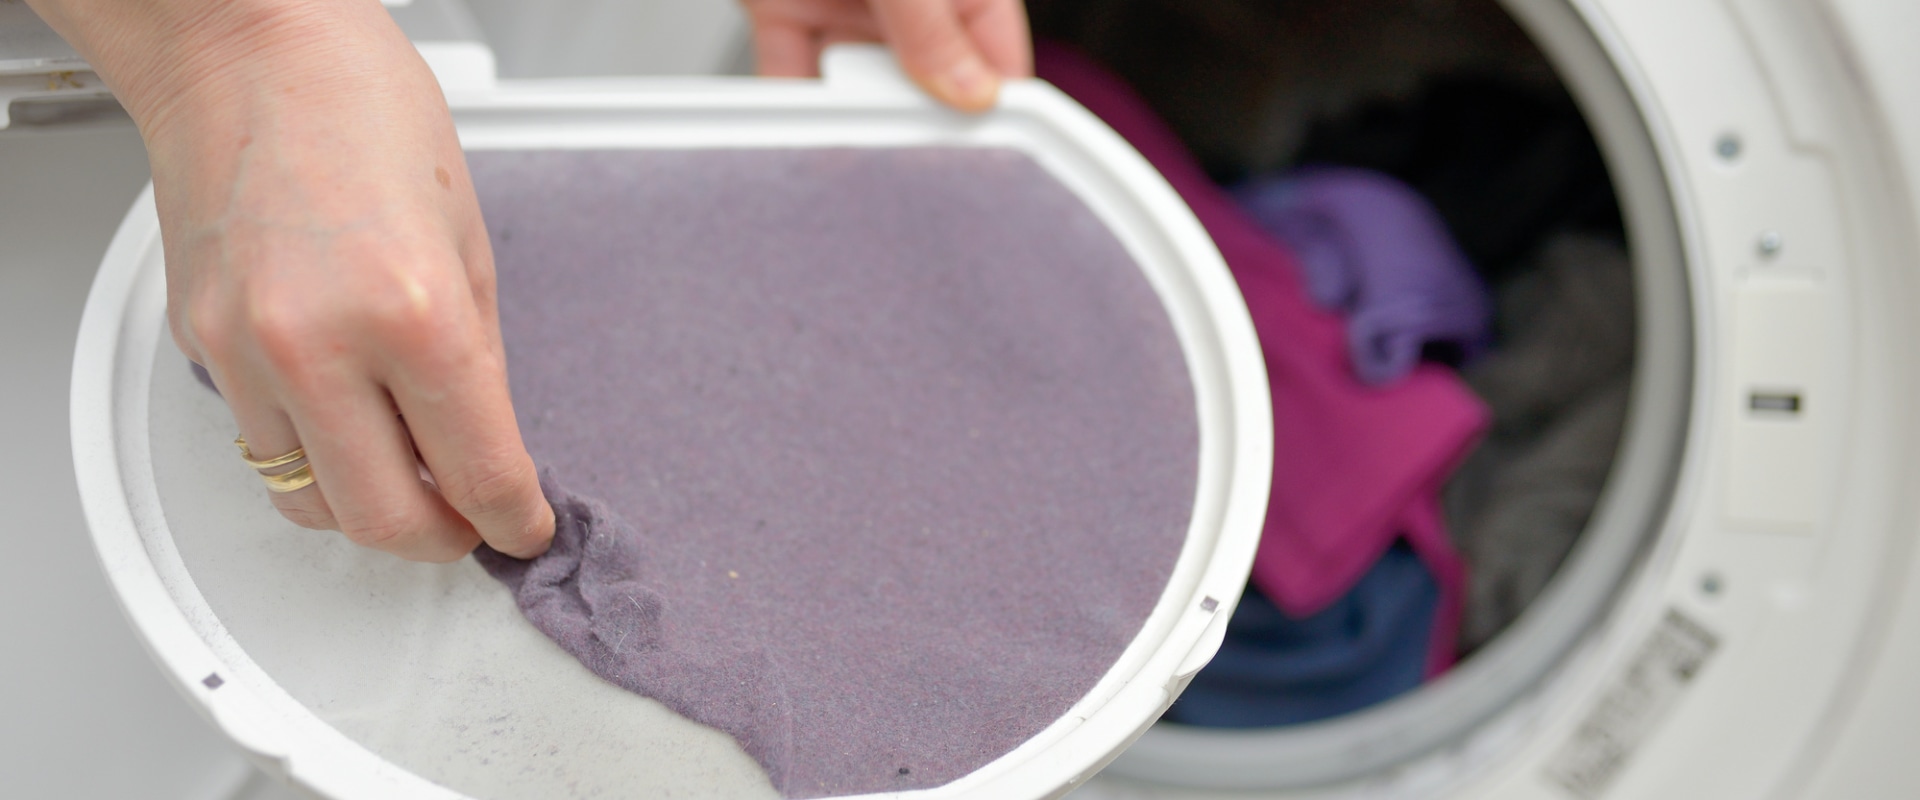 4 Reasons to Clean Your Dryer Vents Now